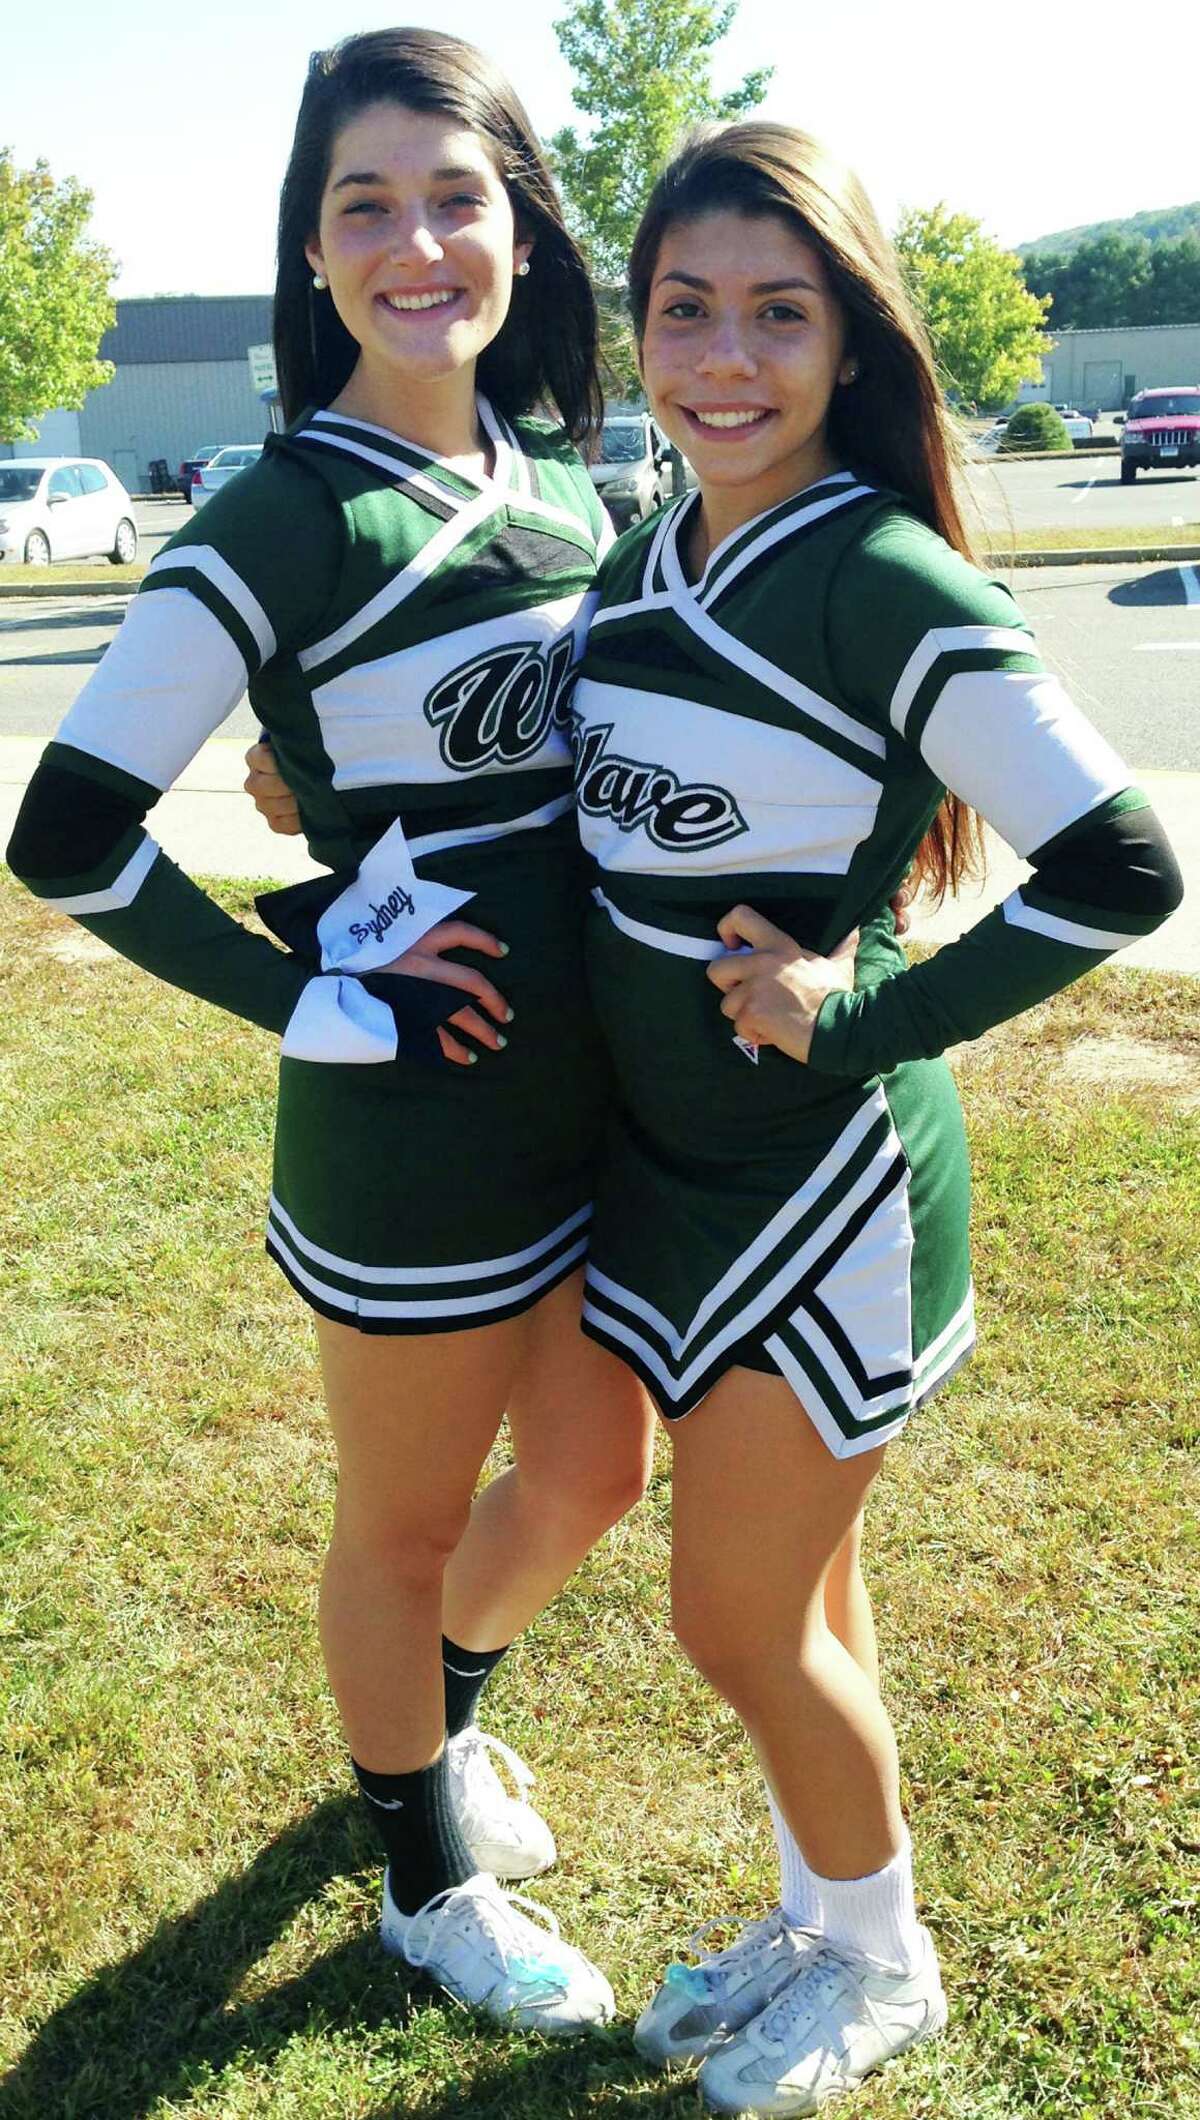 Sydney Fairchild, left, and Alyssa Santos of the New Milford High School cheerleading squad are fundraising for a planned trip to London, England. October 2014 Courtesy of Colleen Fairchild